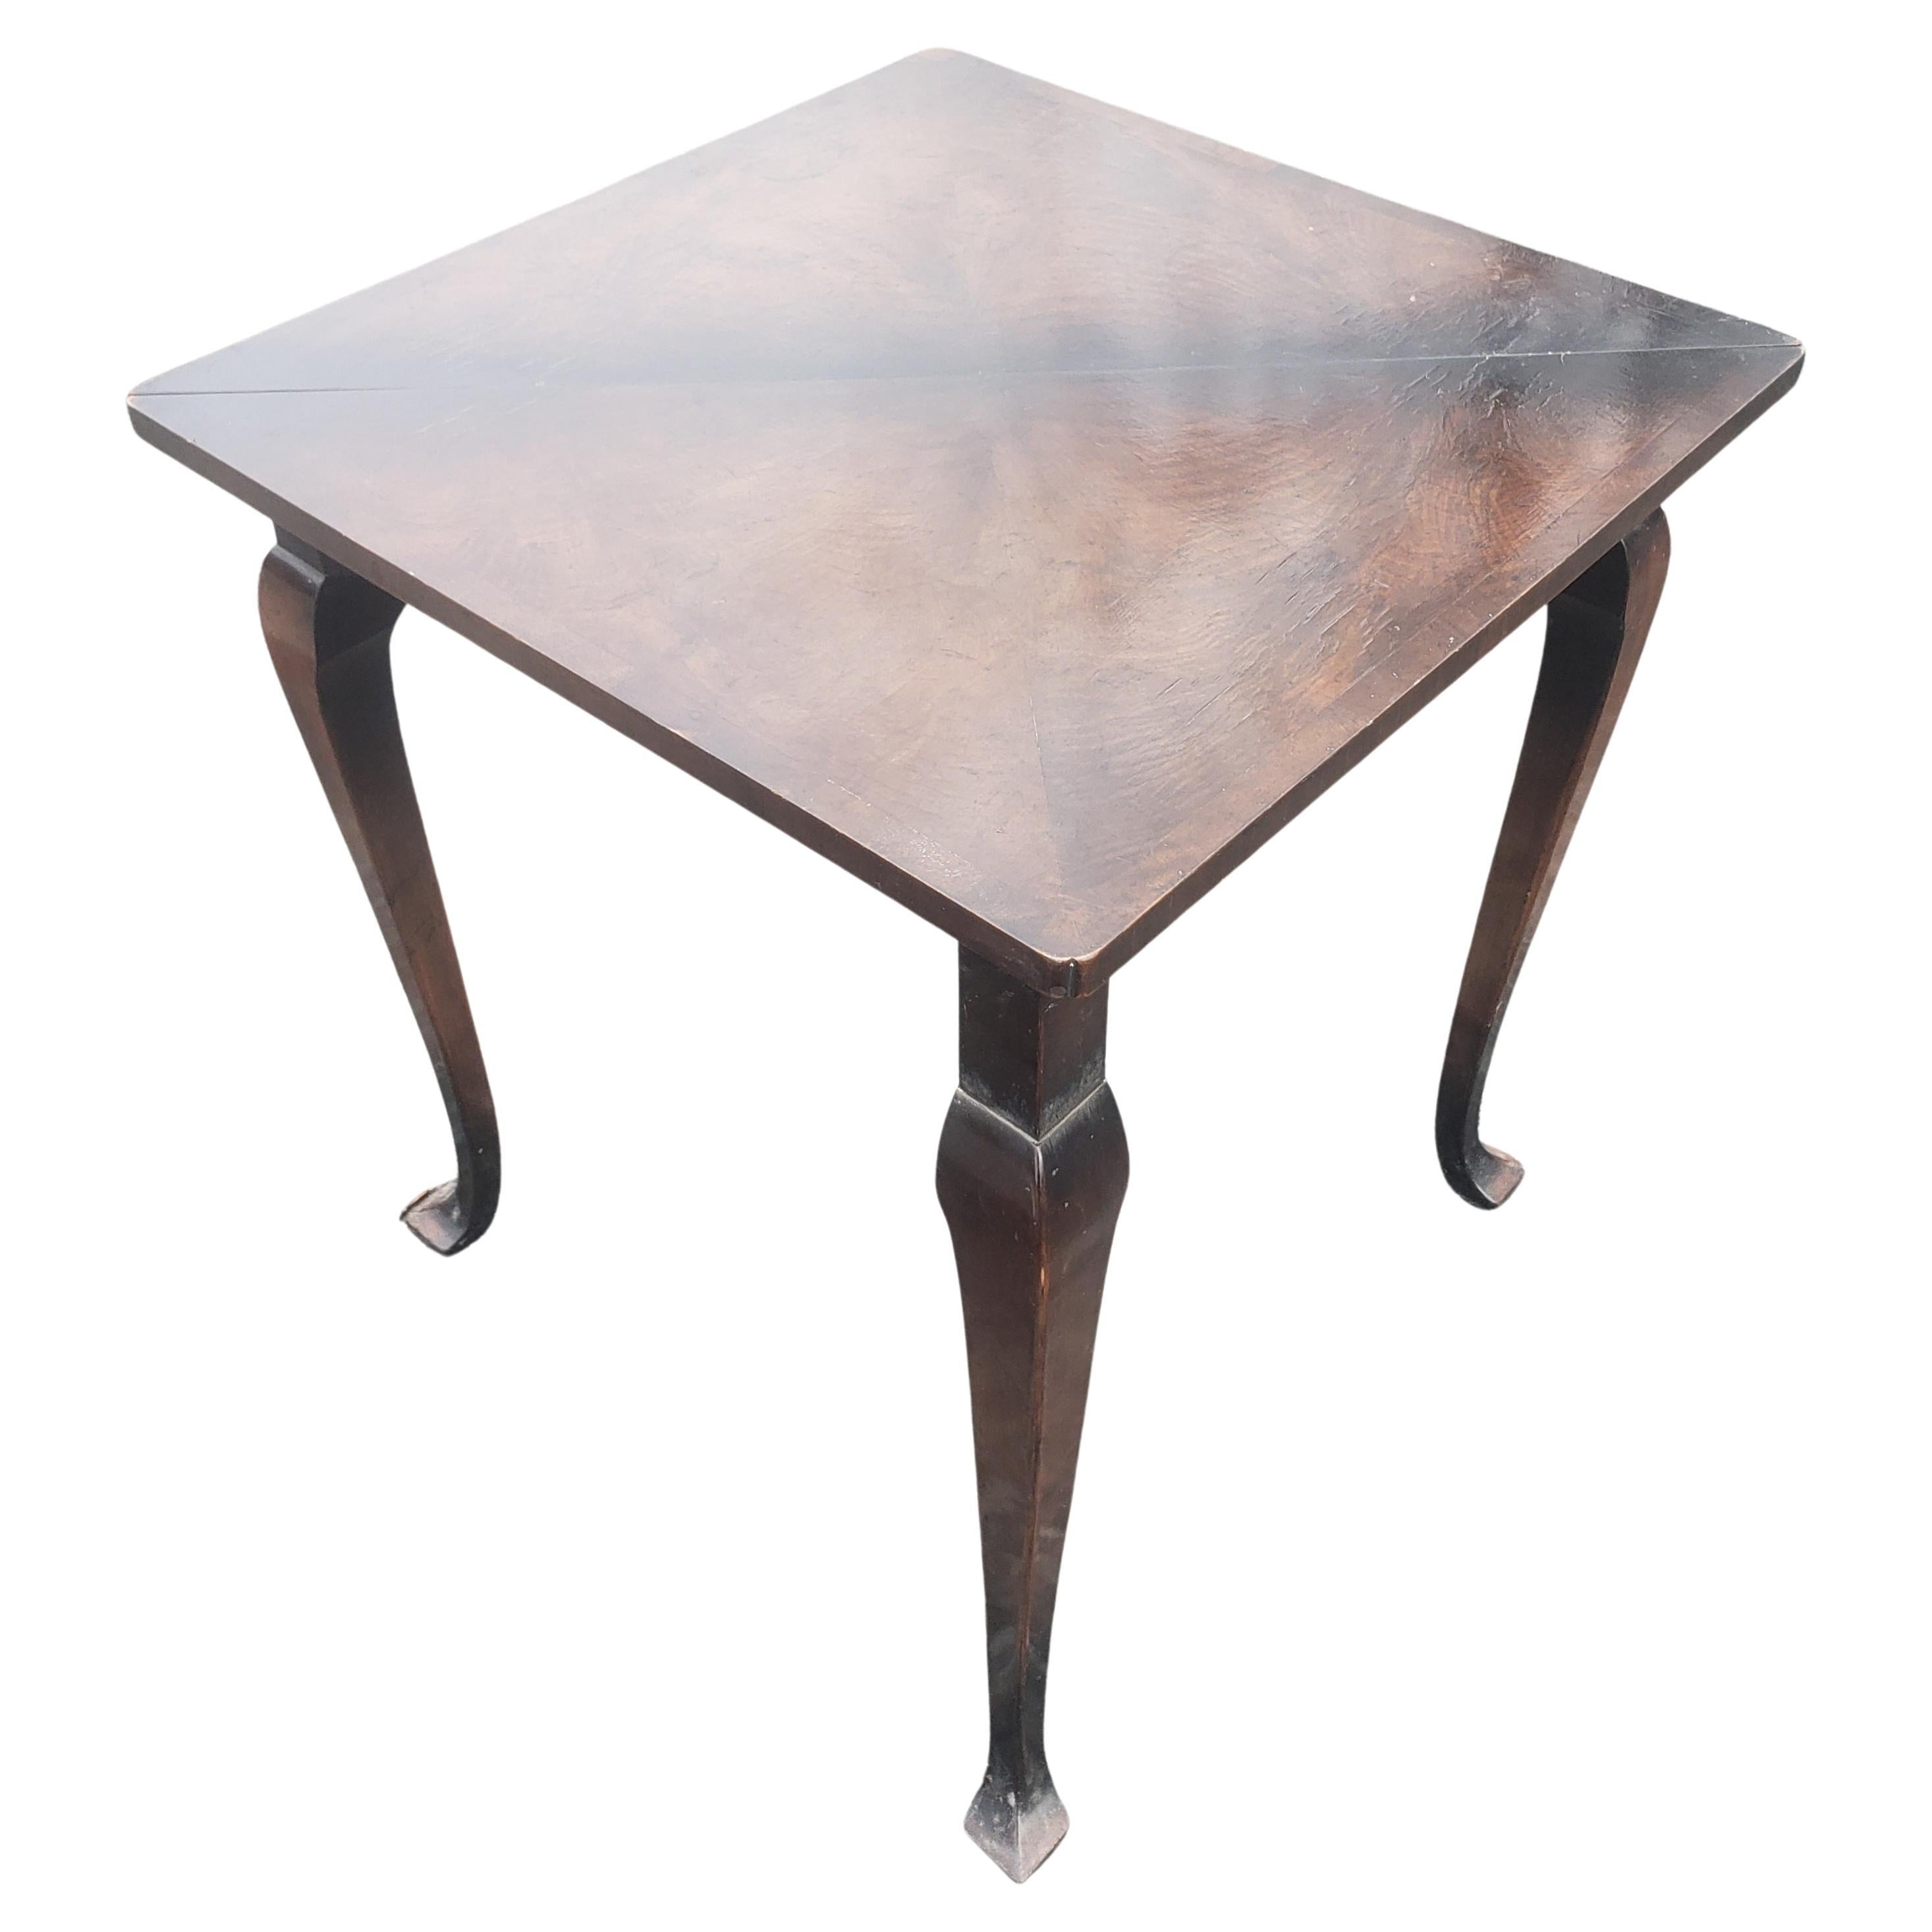 A rare 19th century English walnut and burl walnut hankerchief card table or tea table.
Measures approximately 33.5